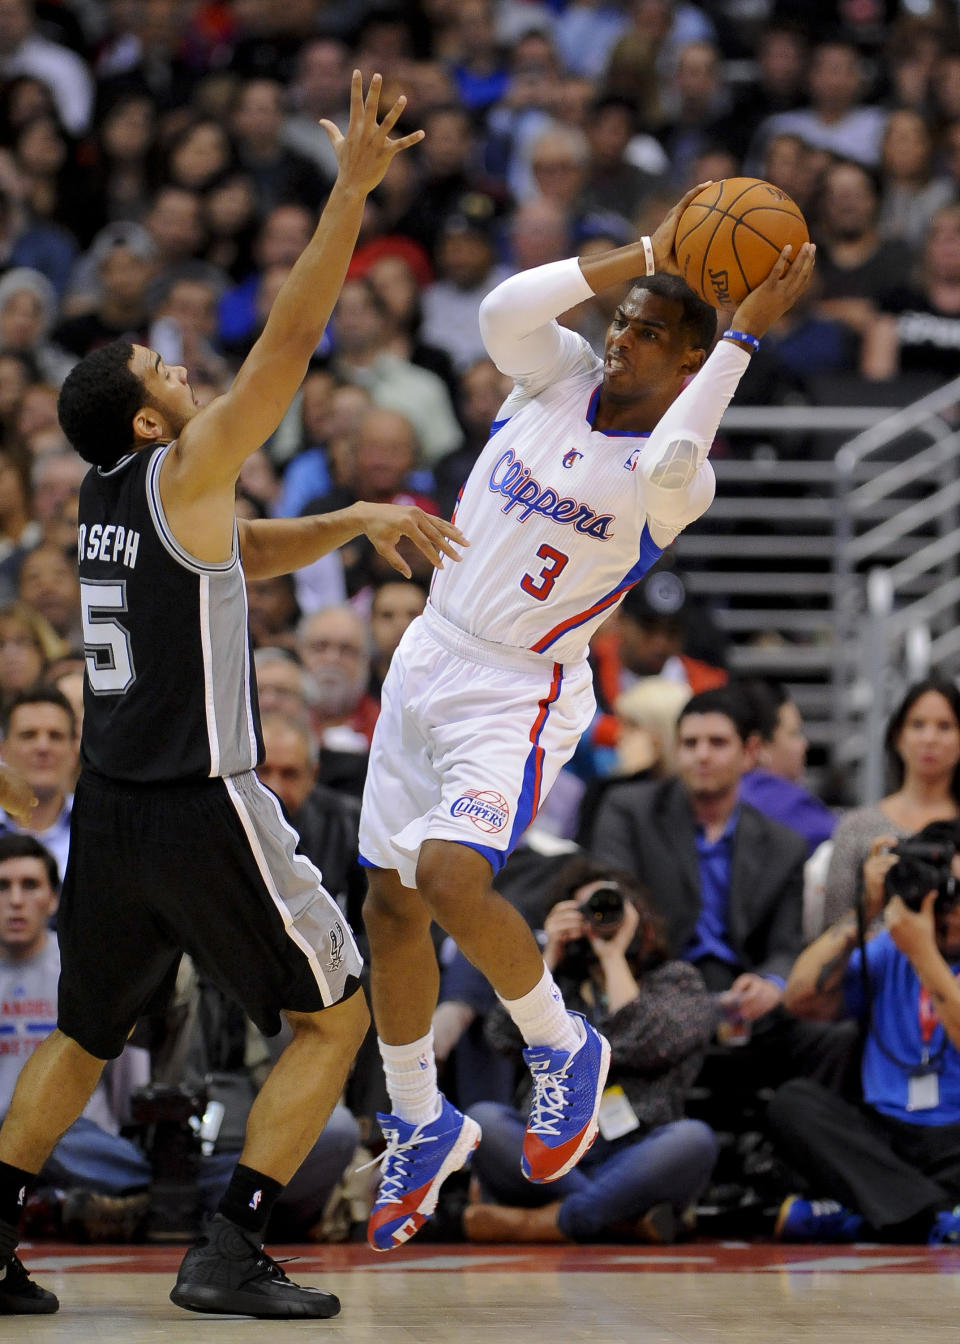 Los Angeles Clippers guard Chris Paul (3) looks around San Antonio Spurs guard Cory Joseph (5) for the open man in the first half of a NBA basketball game, Tuesday, Feb. 18, 2014, in Los Angeles.(AP Photo/Gus Ruelas)